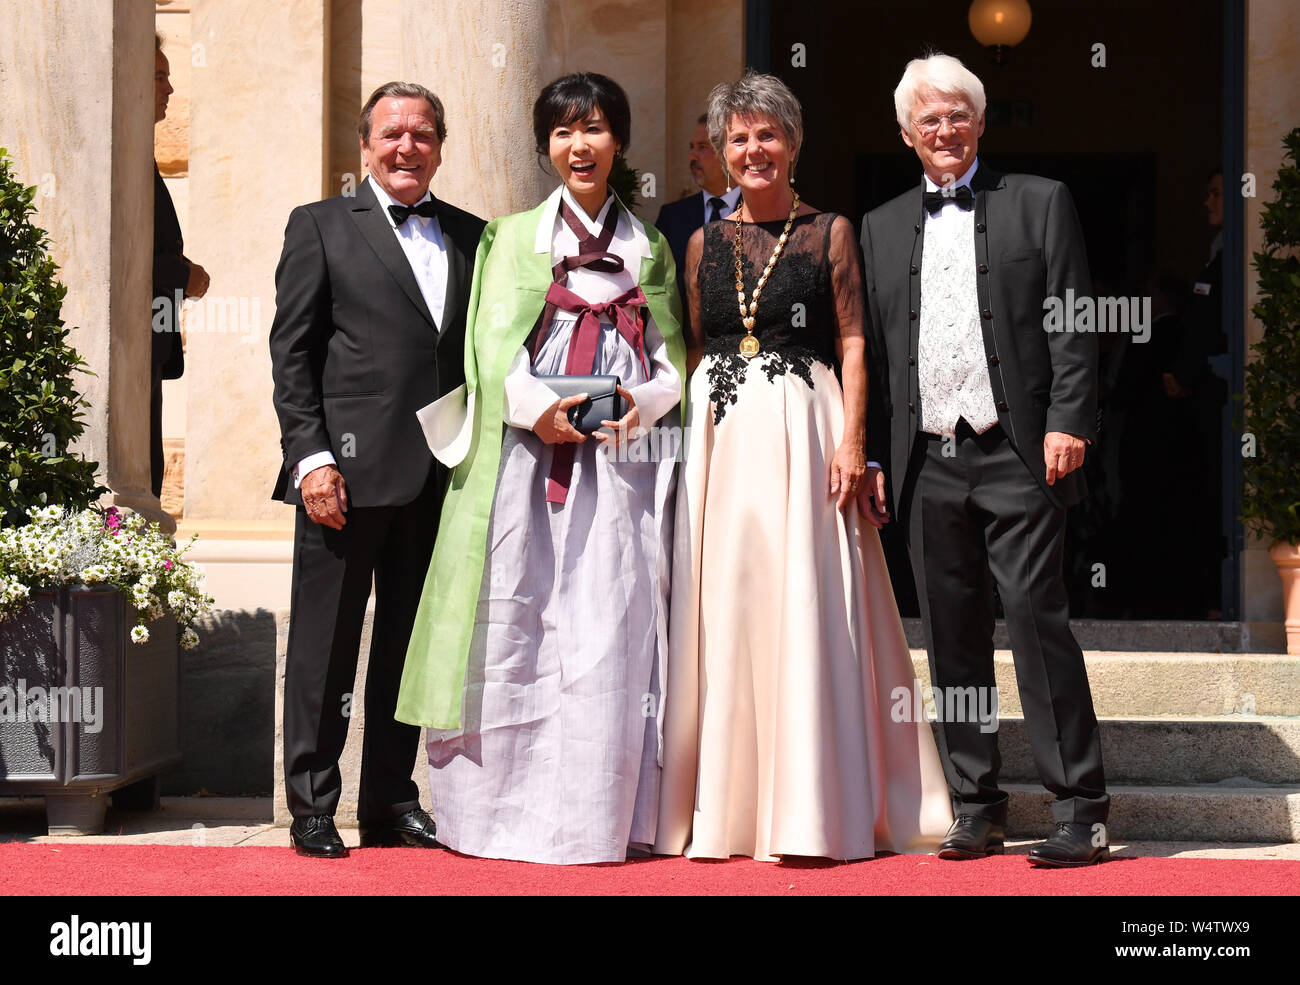 Bayreuth, Germany. 25th July, 2019. The Lord Mayor of Bayreuth Brigitte Merk-Erbe (2nd from right) and her husband Thomas (r) welcome former Chancellor Gerhard Schröder (SPD) and his wife Soyeon Kim to the beginning of the Bayreuth Festival 2019. The Richard Wagner Festival begins in Bayreuth on Thursday. Numerous celebrities are expected on the red carpet. (To dpa 'Bayreuth Festival start in heat with new 'Tannhäuser'') Credit: Tobias Hase/dpa/Alamy Live News Stock Photo